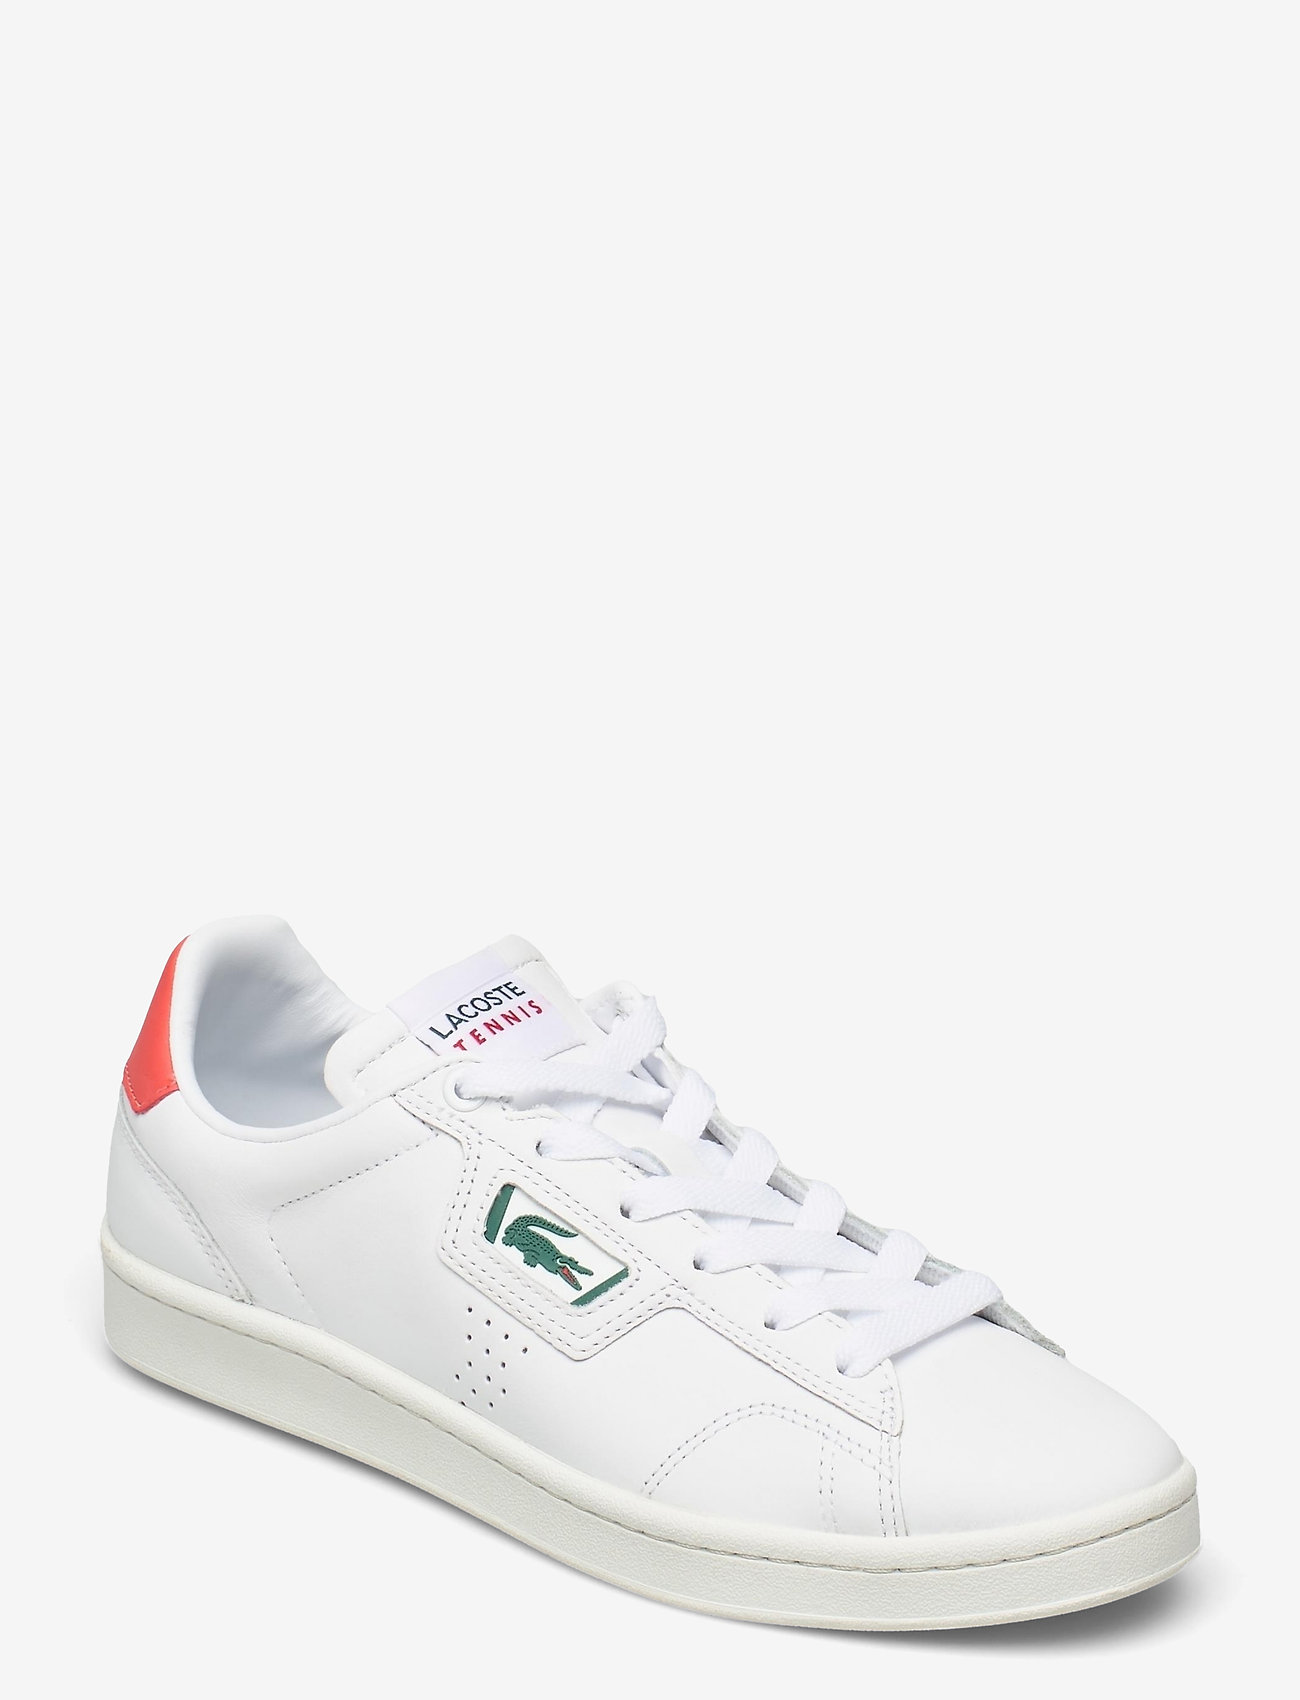 Lacoste Shoes - MASTERS CLASS 07211 - low top sneakers - wht/pnk - 0